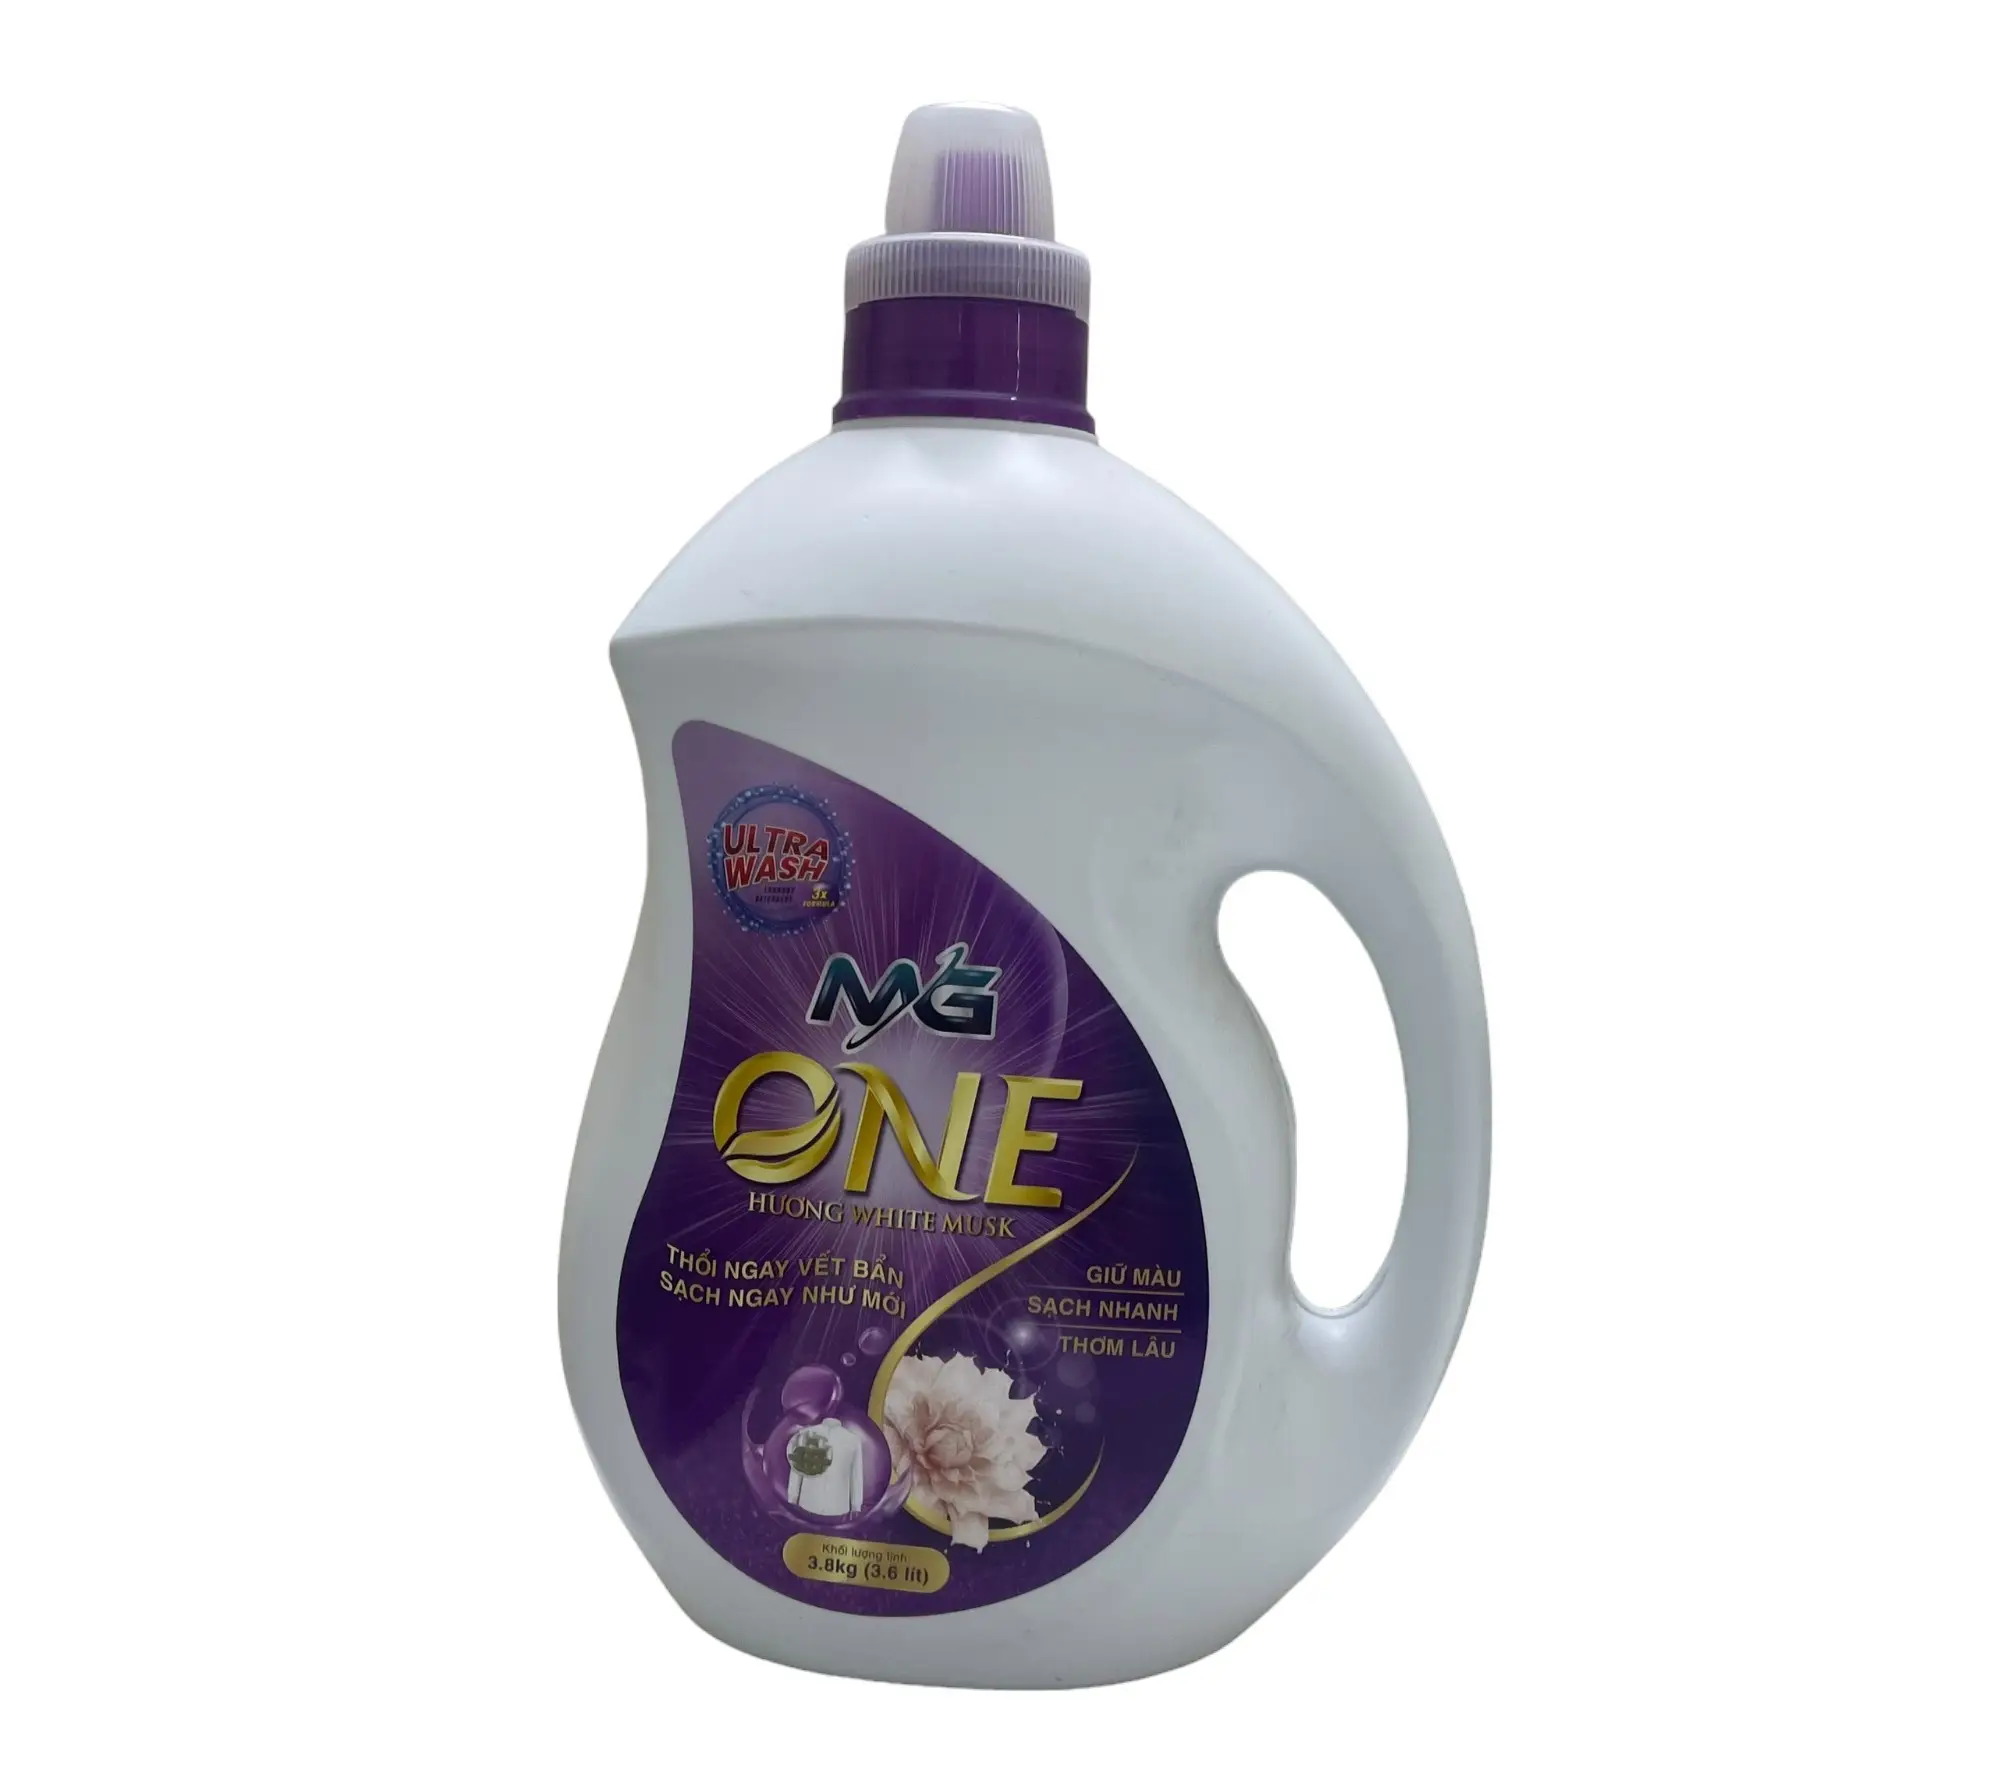 White musk perfume scented laundry detergent cleans deeply and has a long-lasting fragrance that preserves the color of clothes